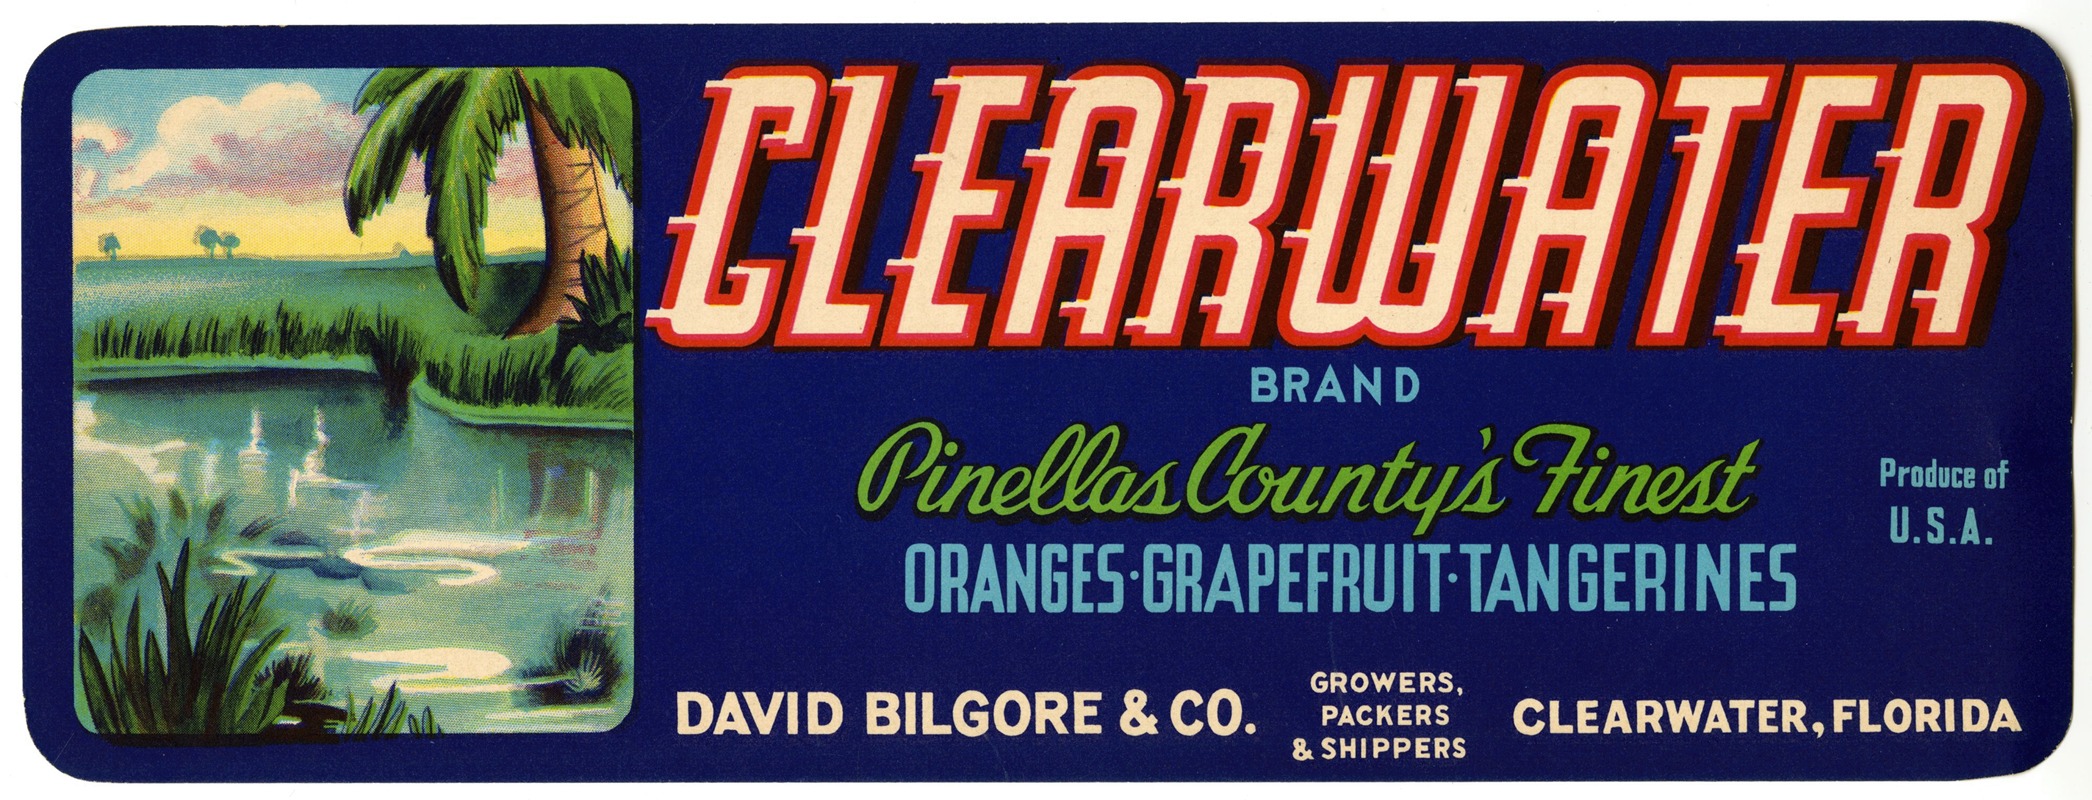 Anonymous - Clearwater Brand Citrus Label